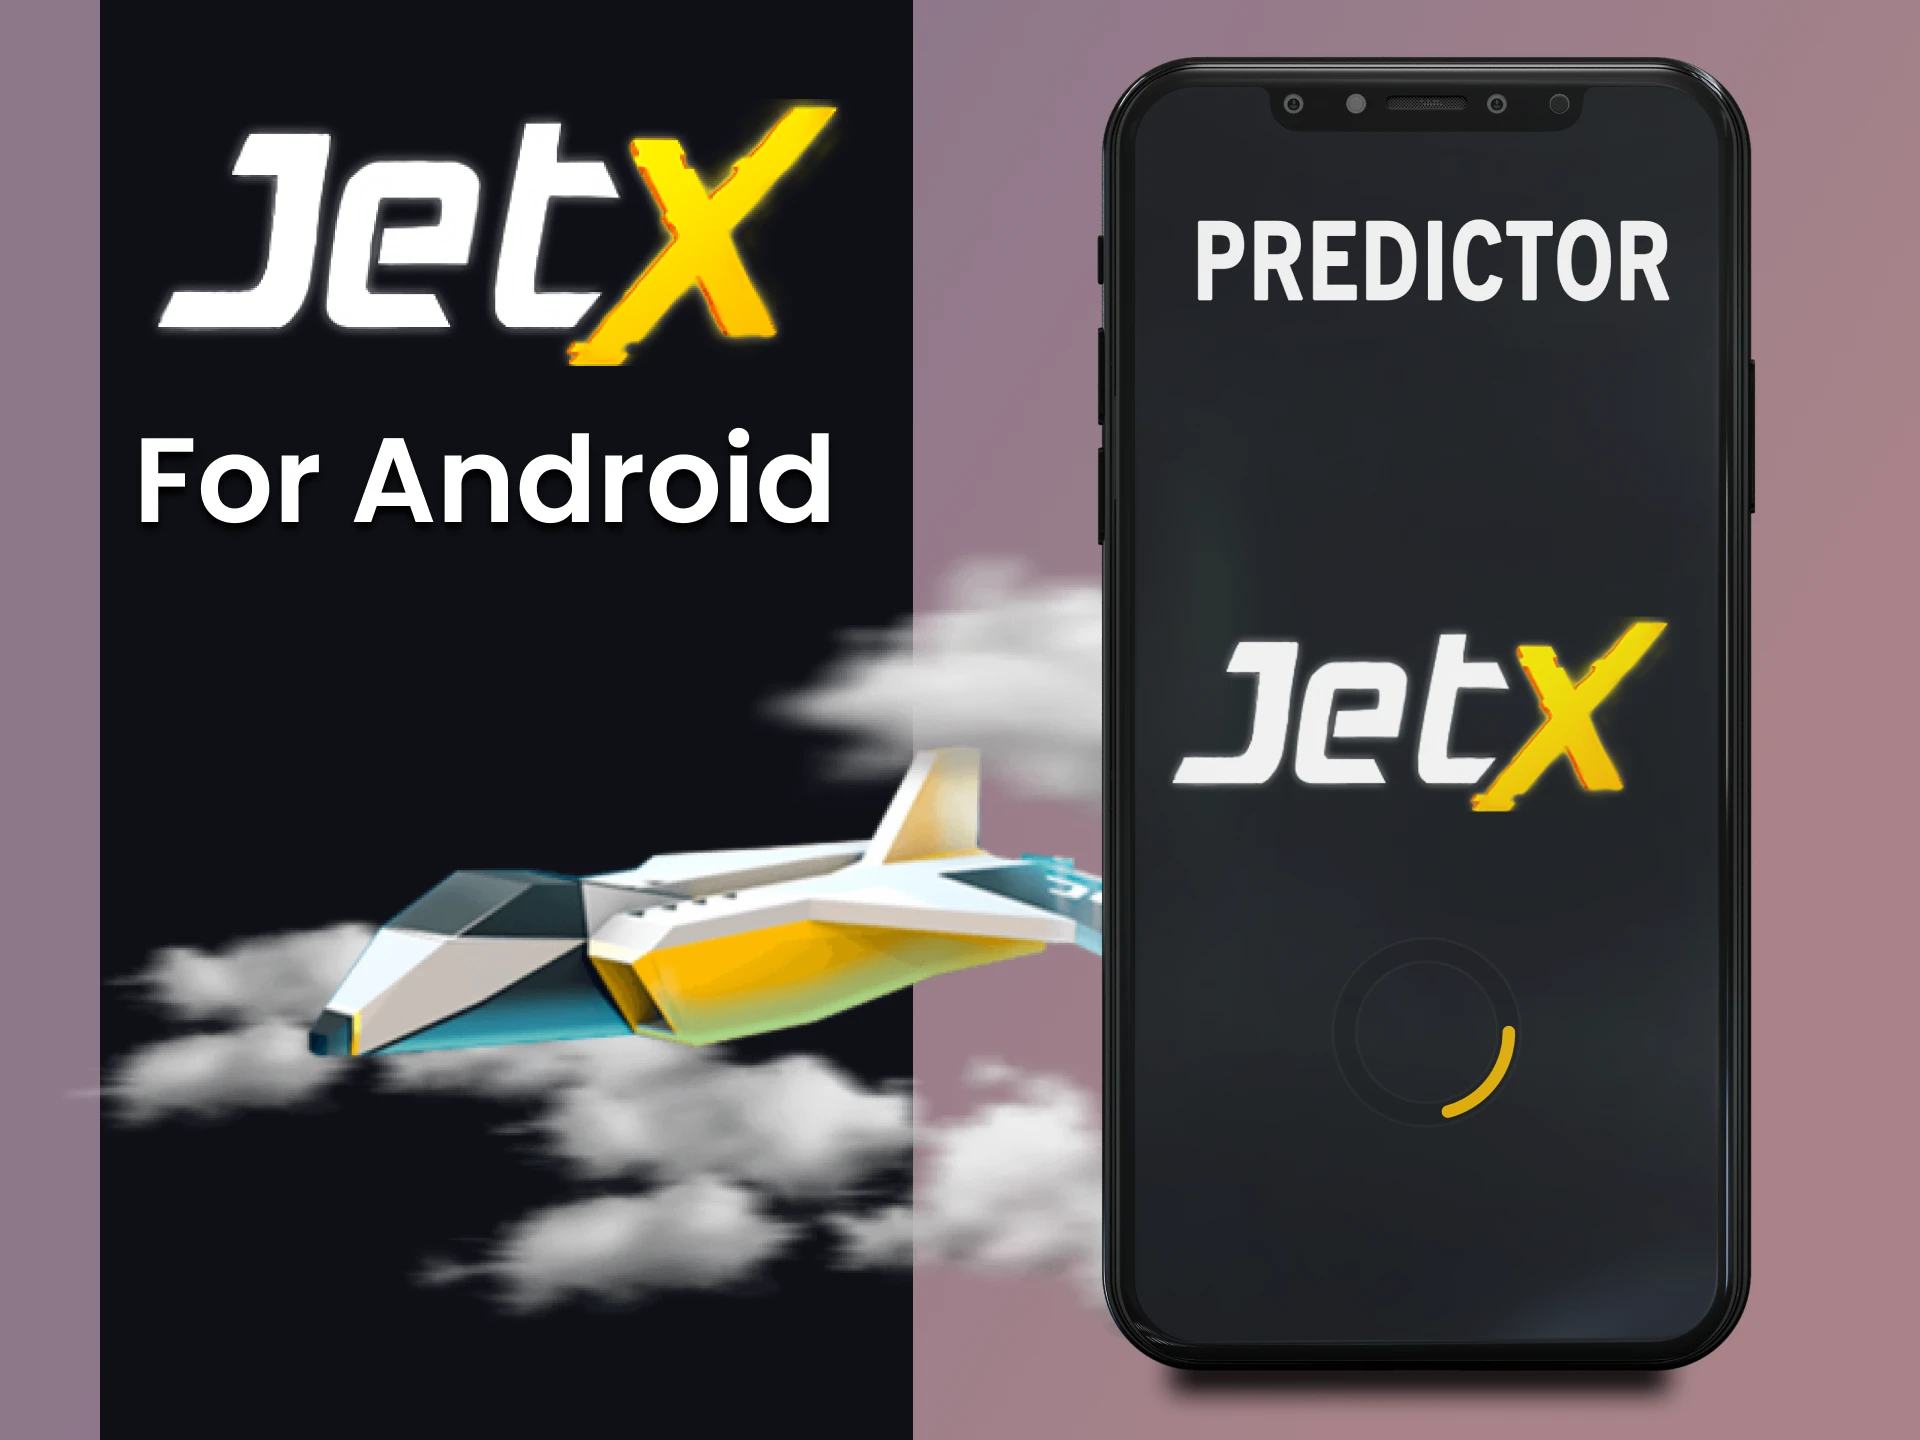 Learn how to install third party software for JetX on Android.